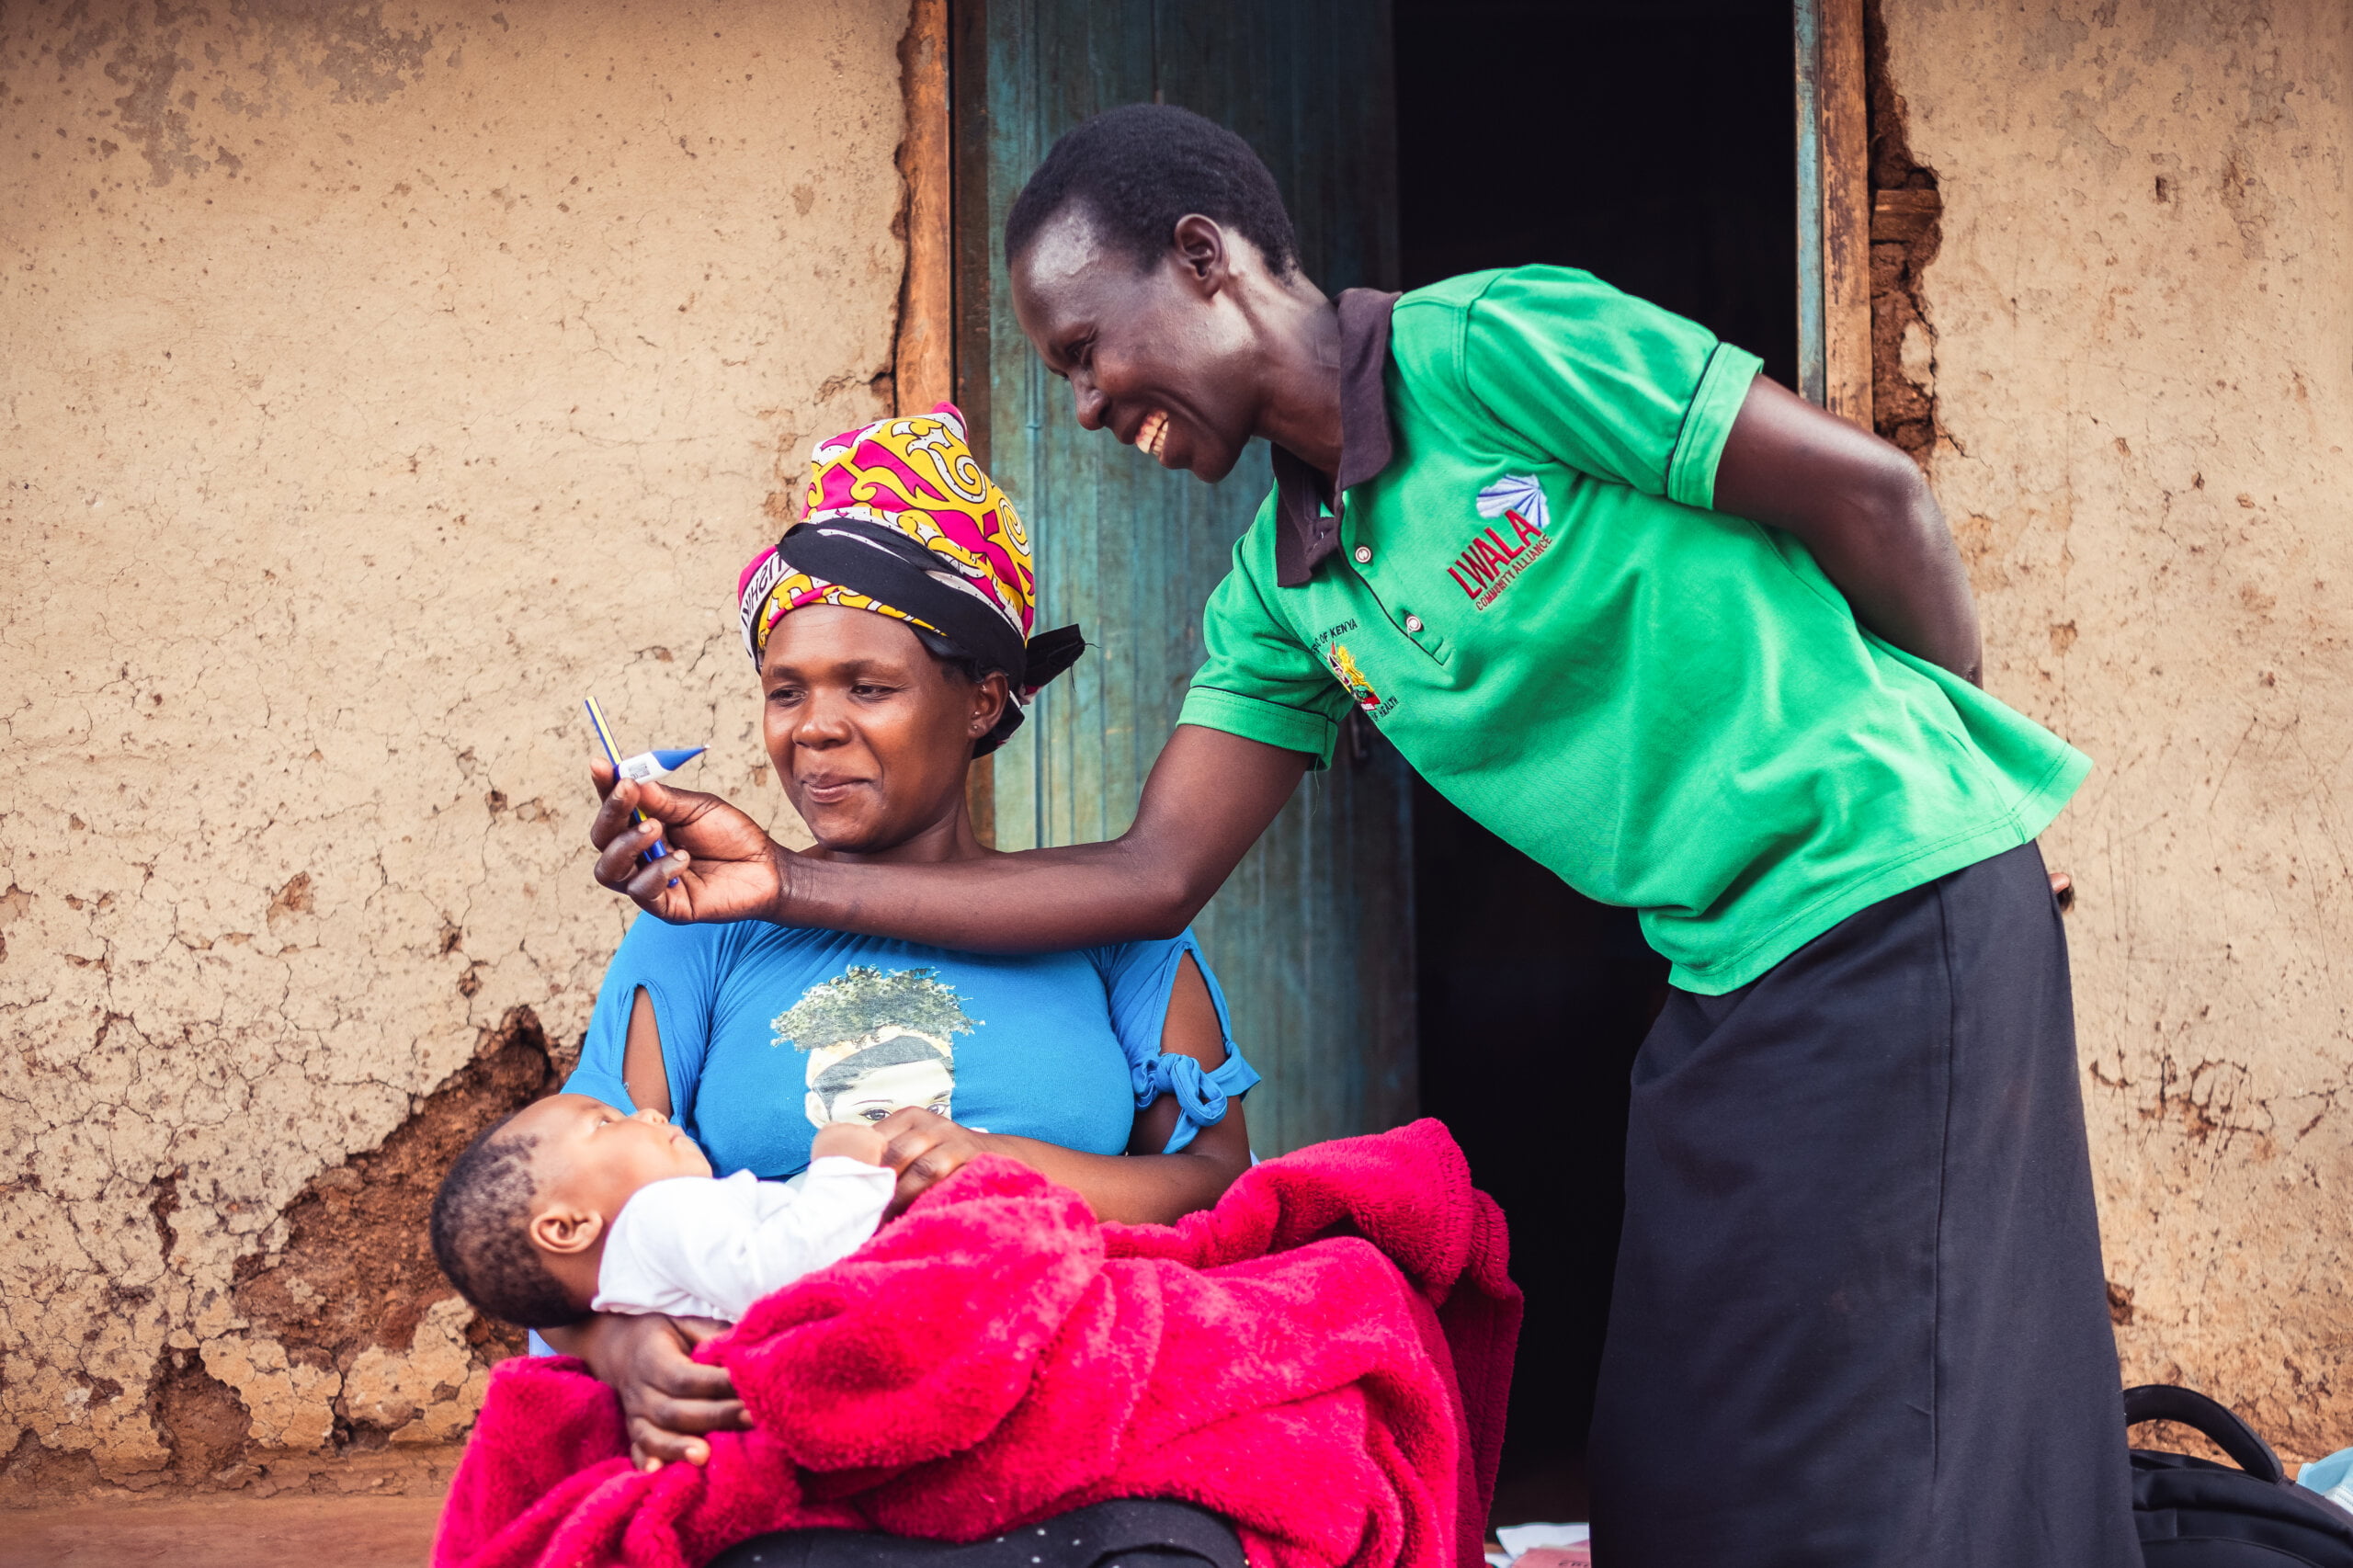 Community health worker from Lwala assisting a new mother and her baby in Kenya